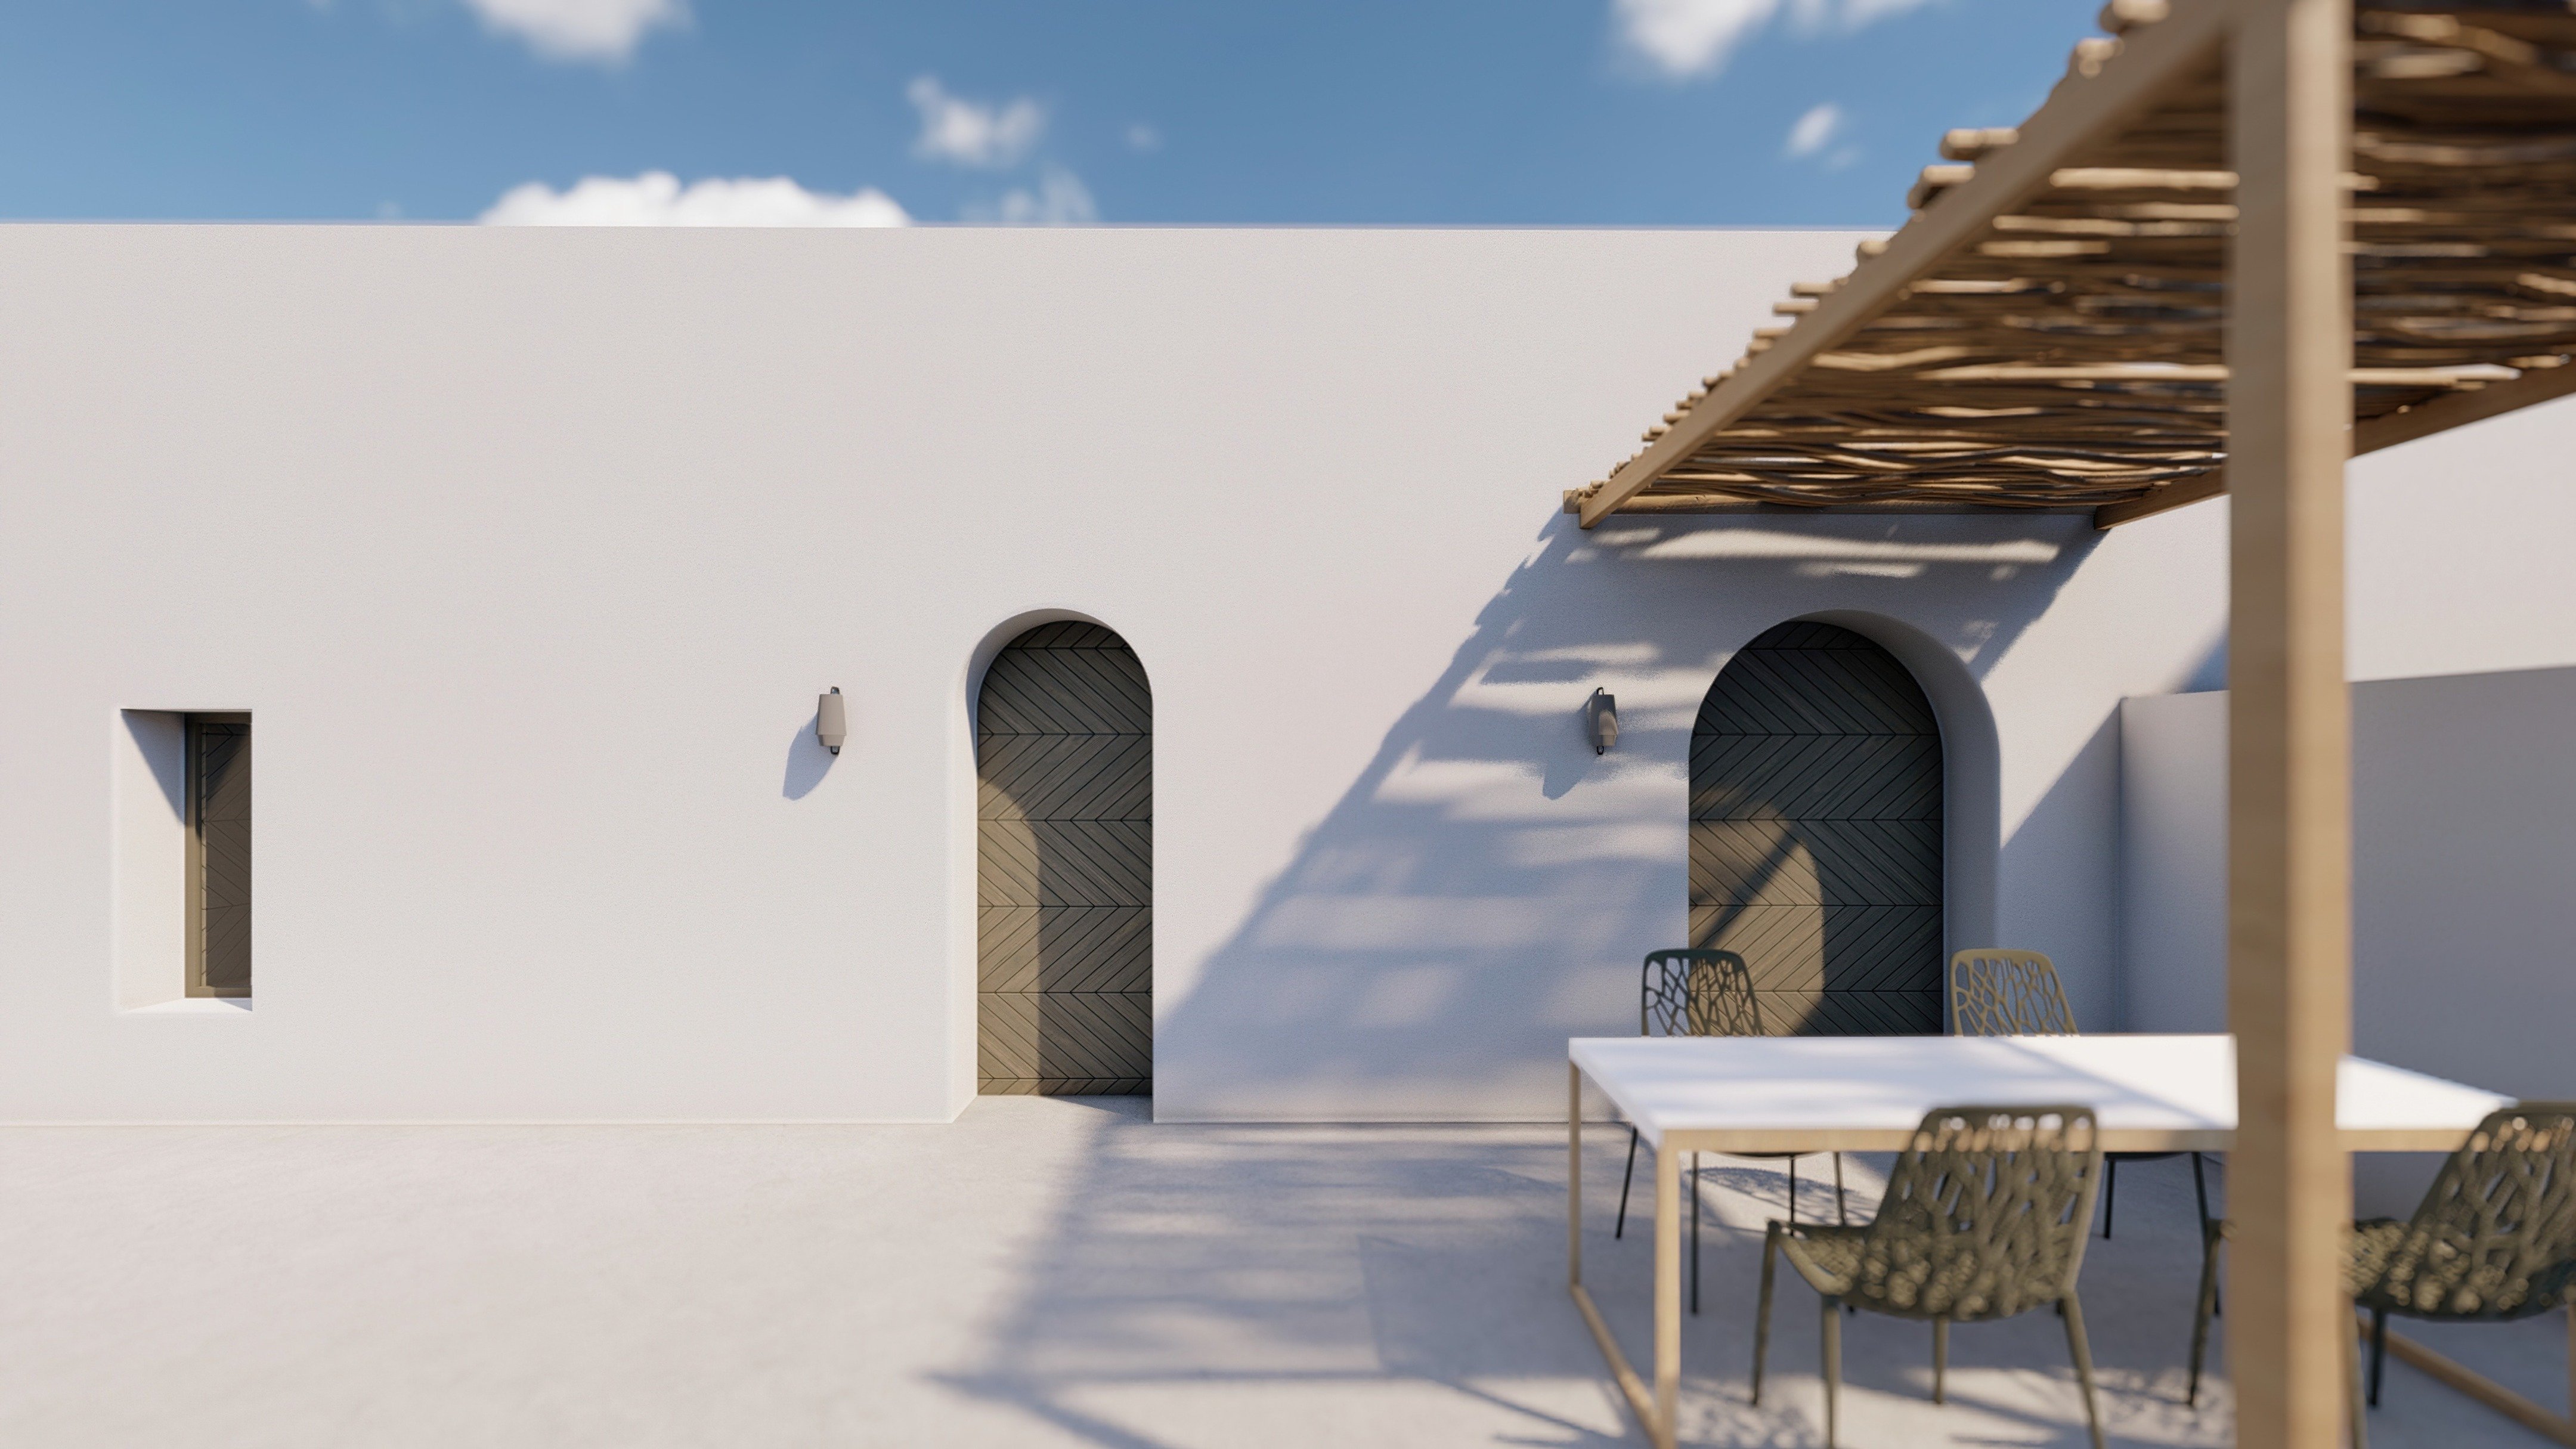  Arched residences in Santorini island